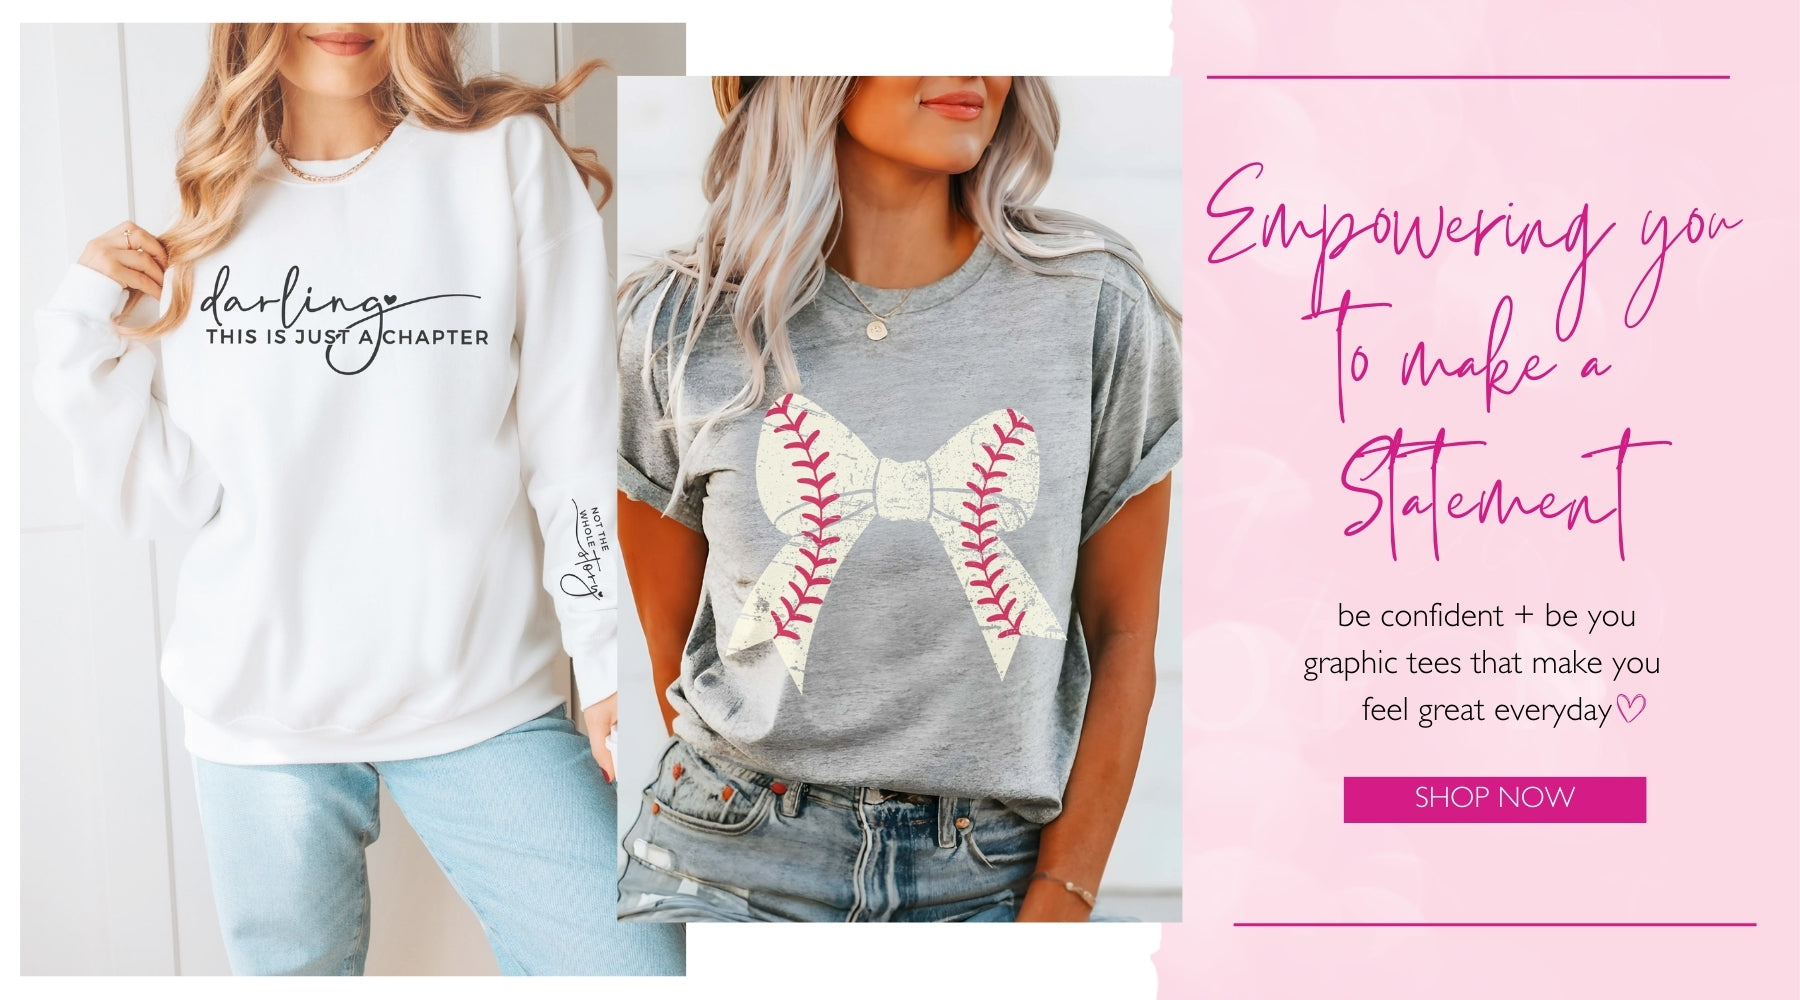 empowering you to make a statement- be confident, be you- graphic tees that make you feel great everyday- shop now at Limeberry Designs